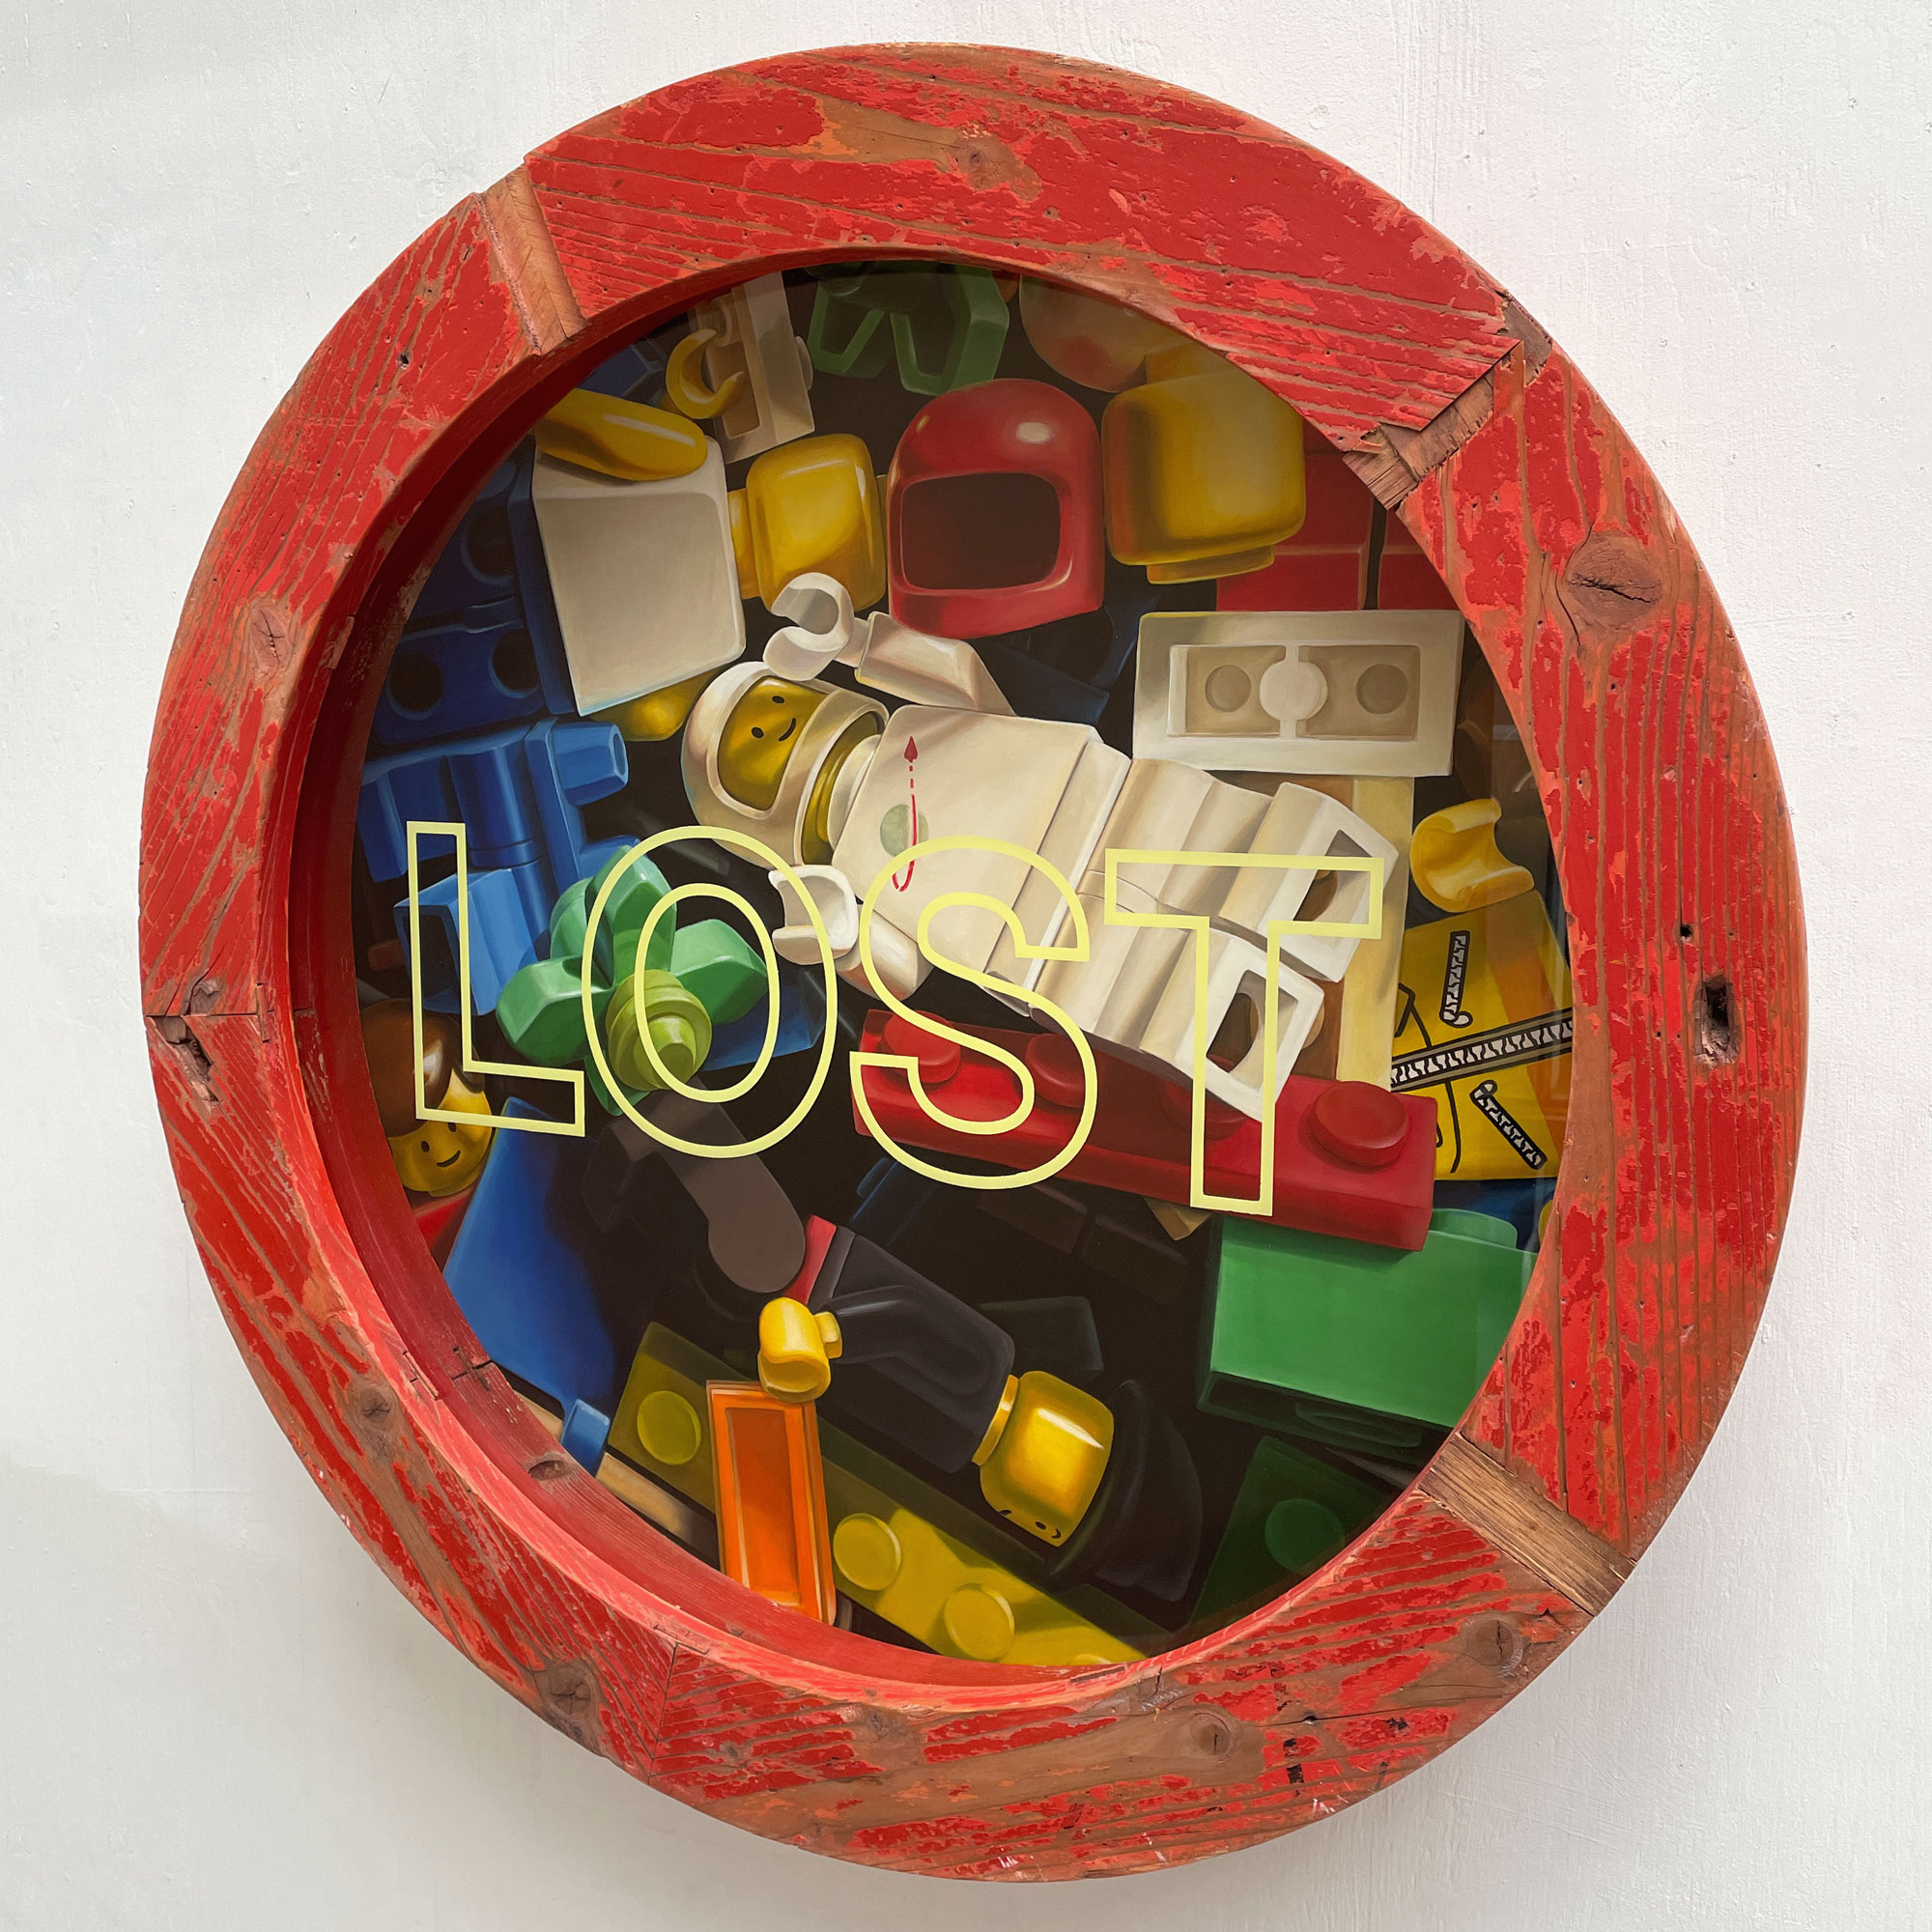 Lost painting by Leon Keer Lego